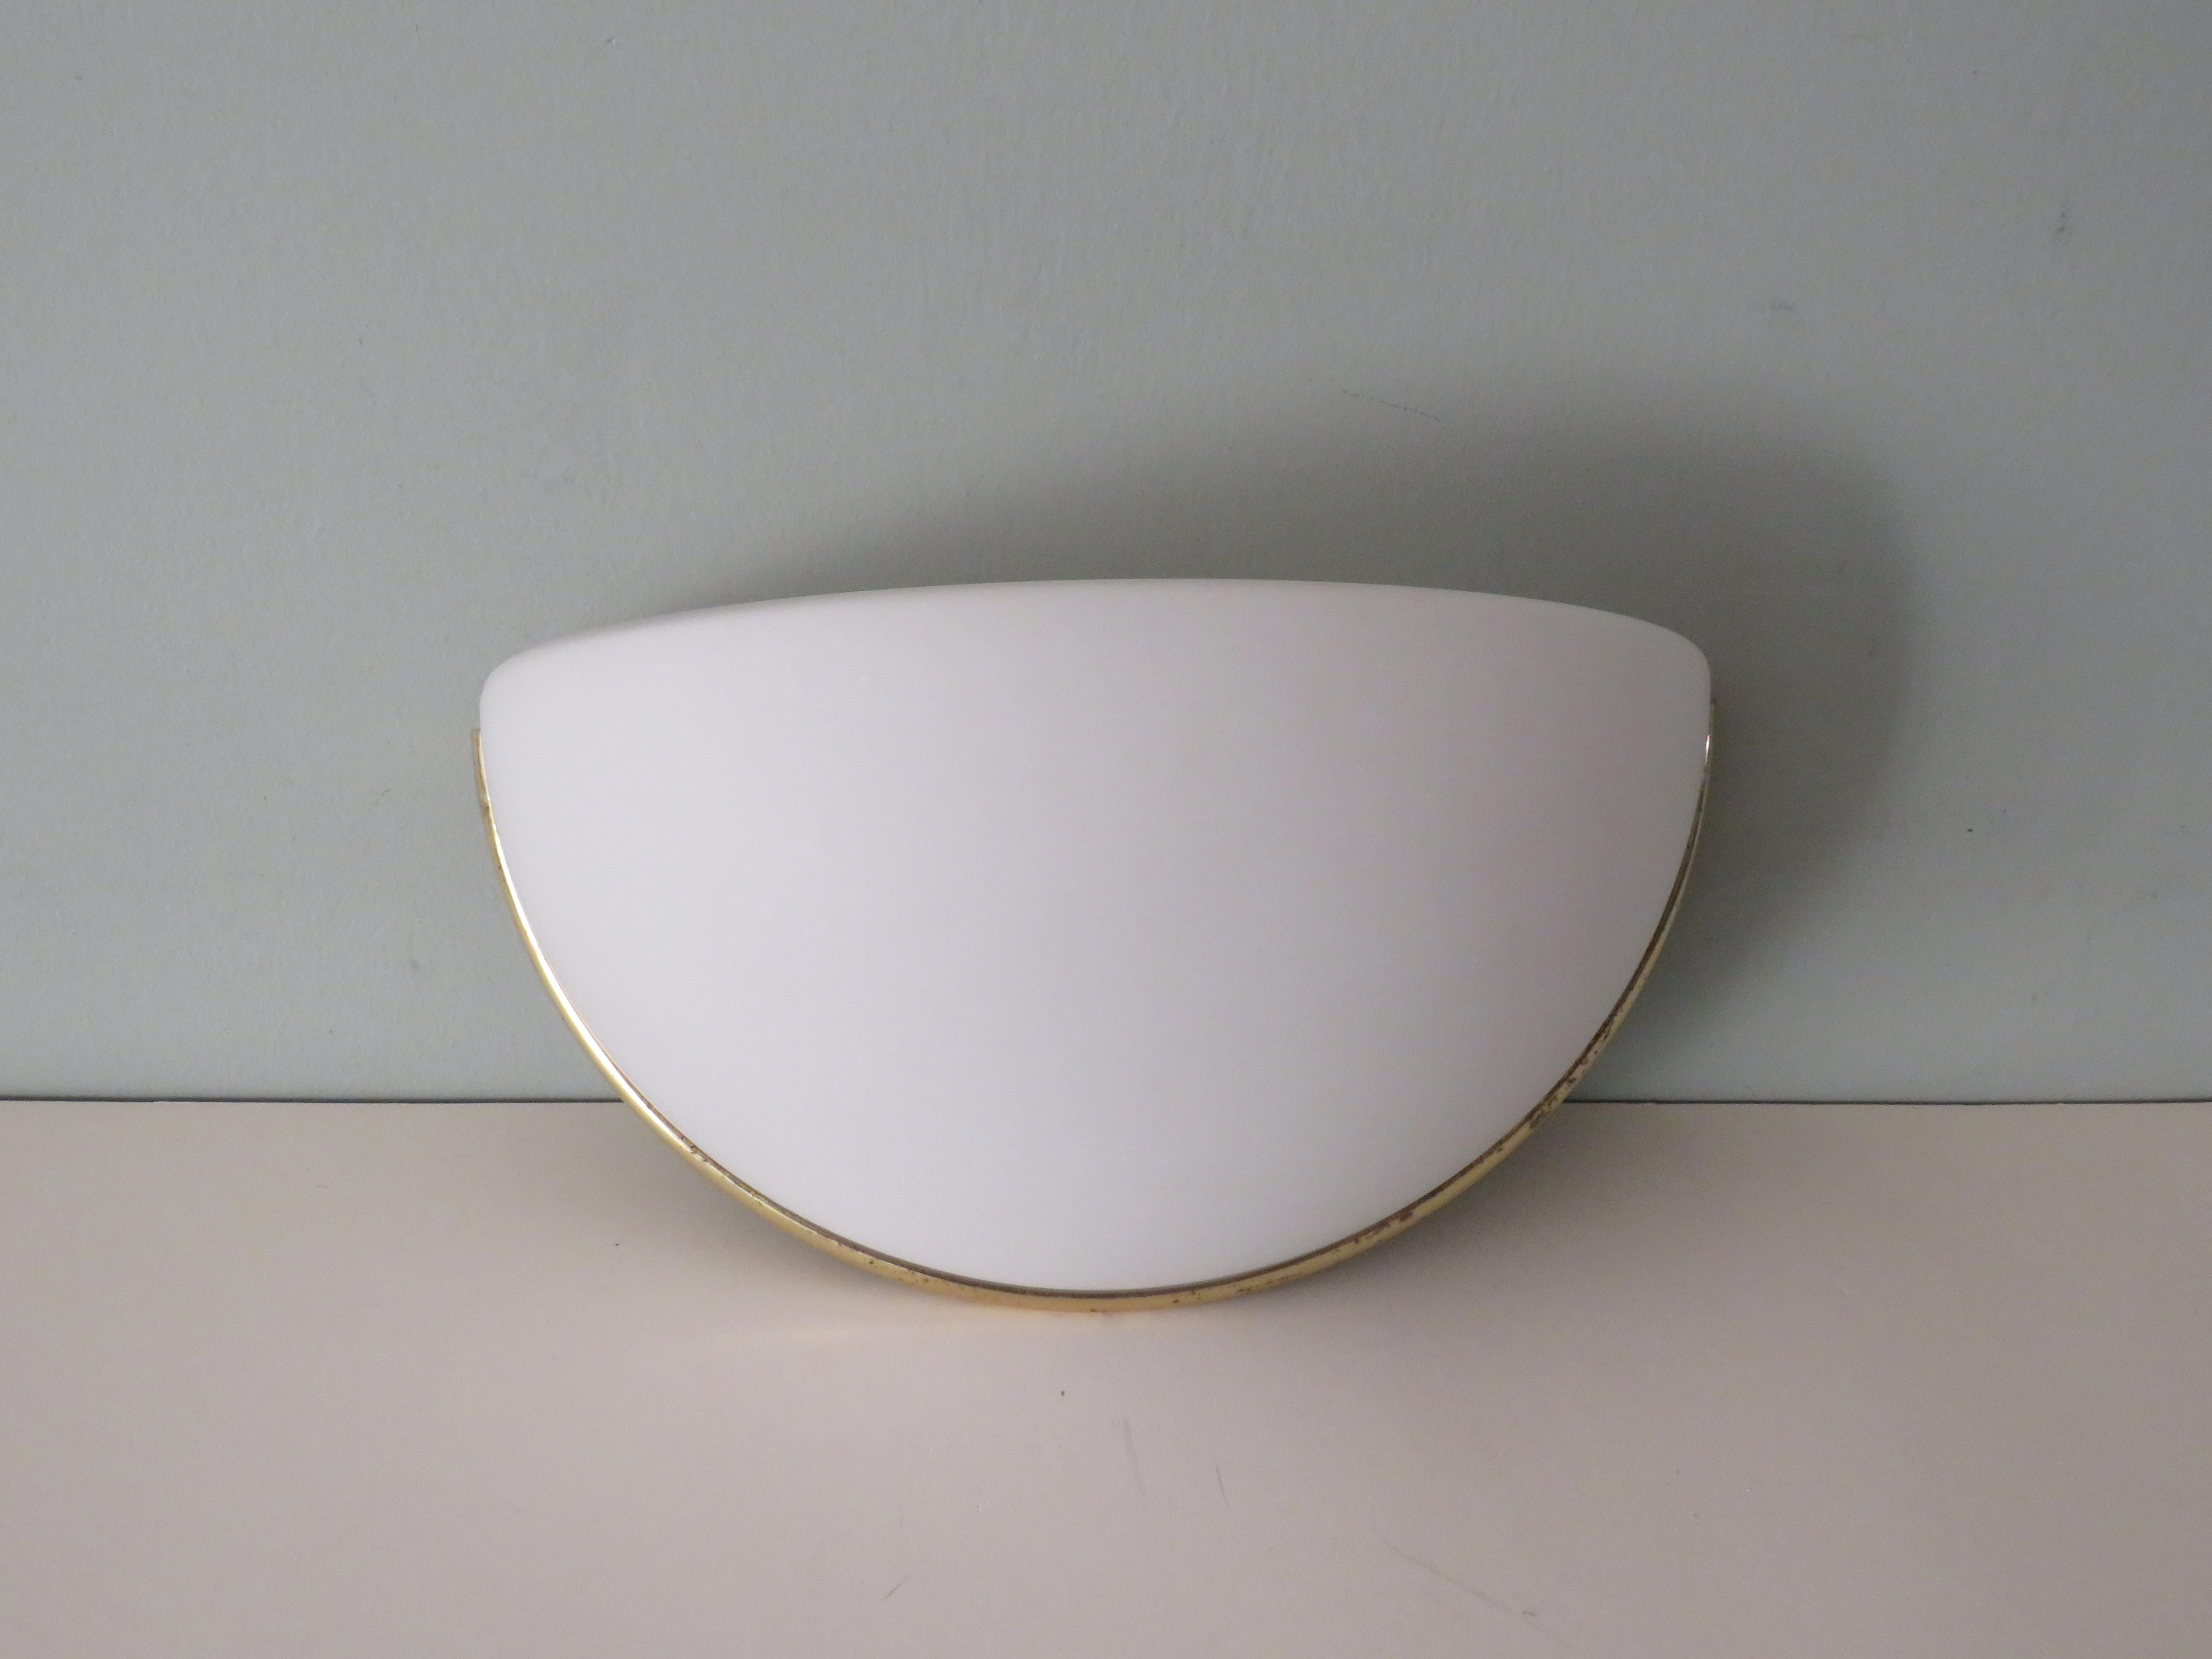 Semi-sphere-shaped wall lamp in opaline glass in a gold-coloured brass frame. The lamp is not open at the top but closed.
The lamp is equipped with 1 E 14 fitting and complete with wall mounting plate.
The lamp is in good condition, the brass edge